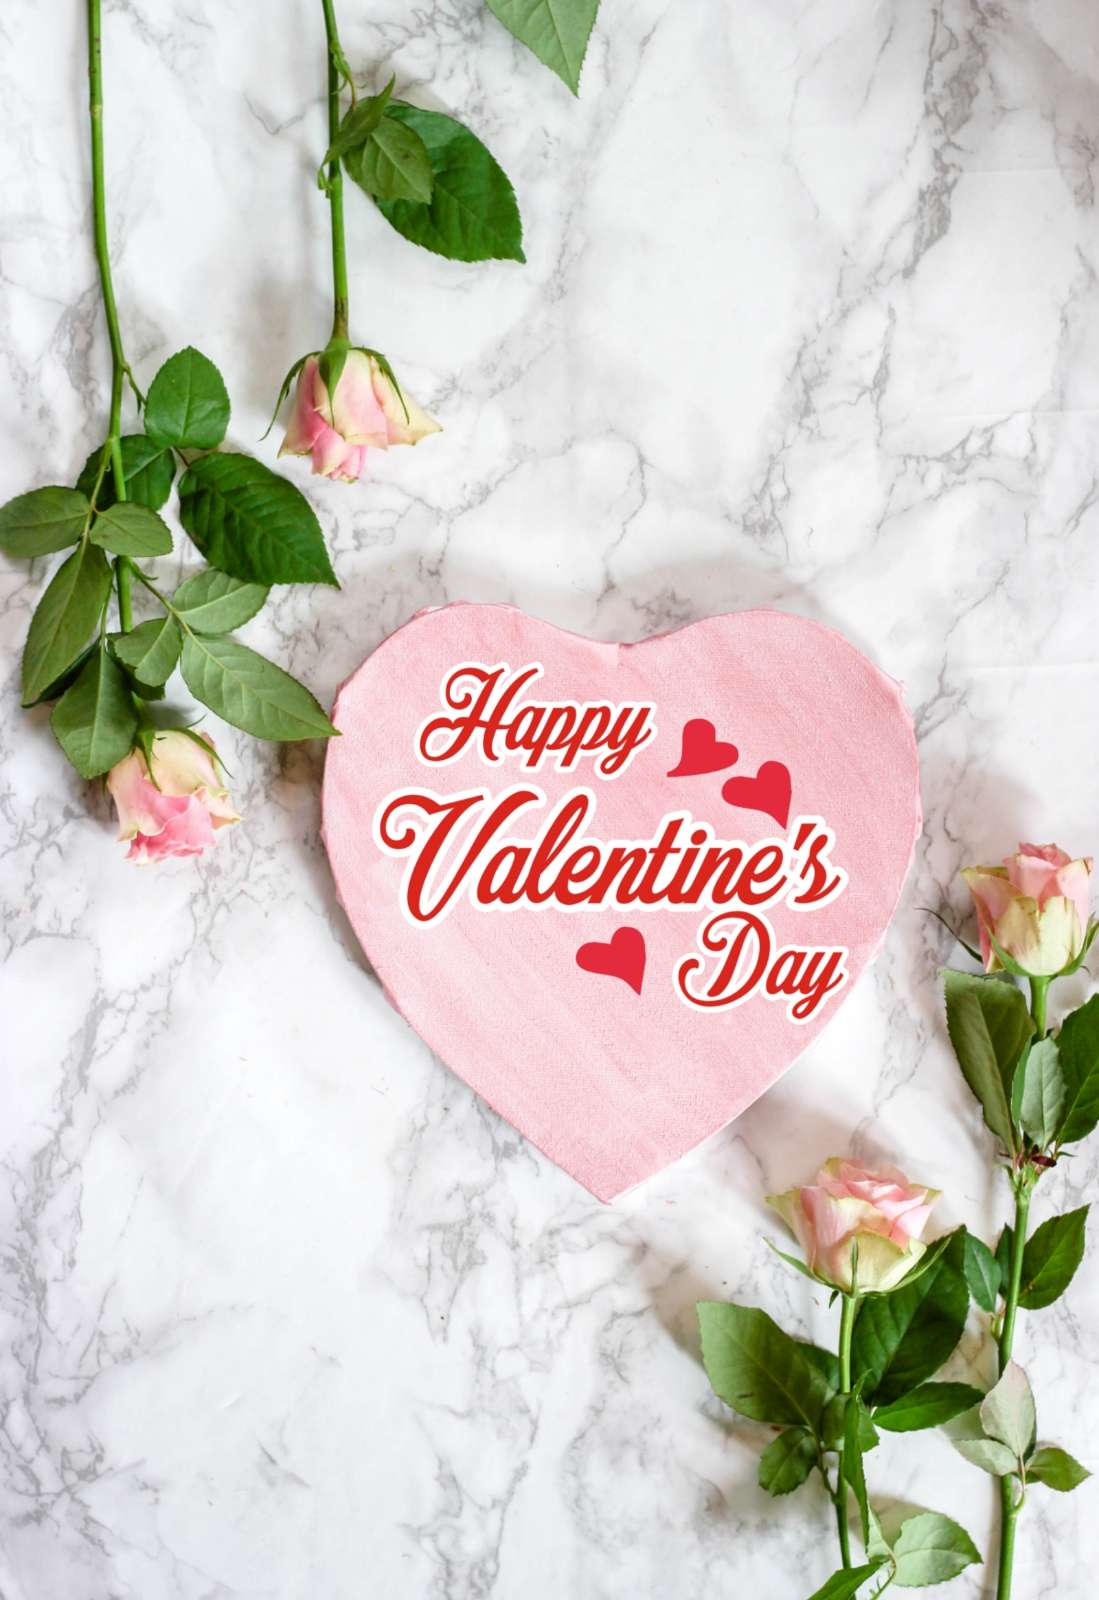 Romantic Valentines Day Images Download